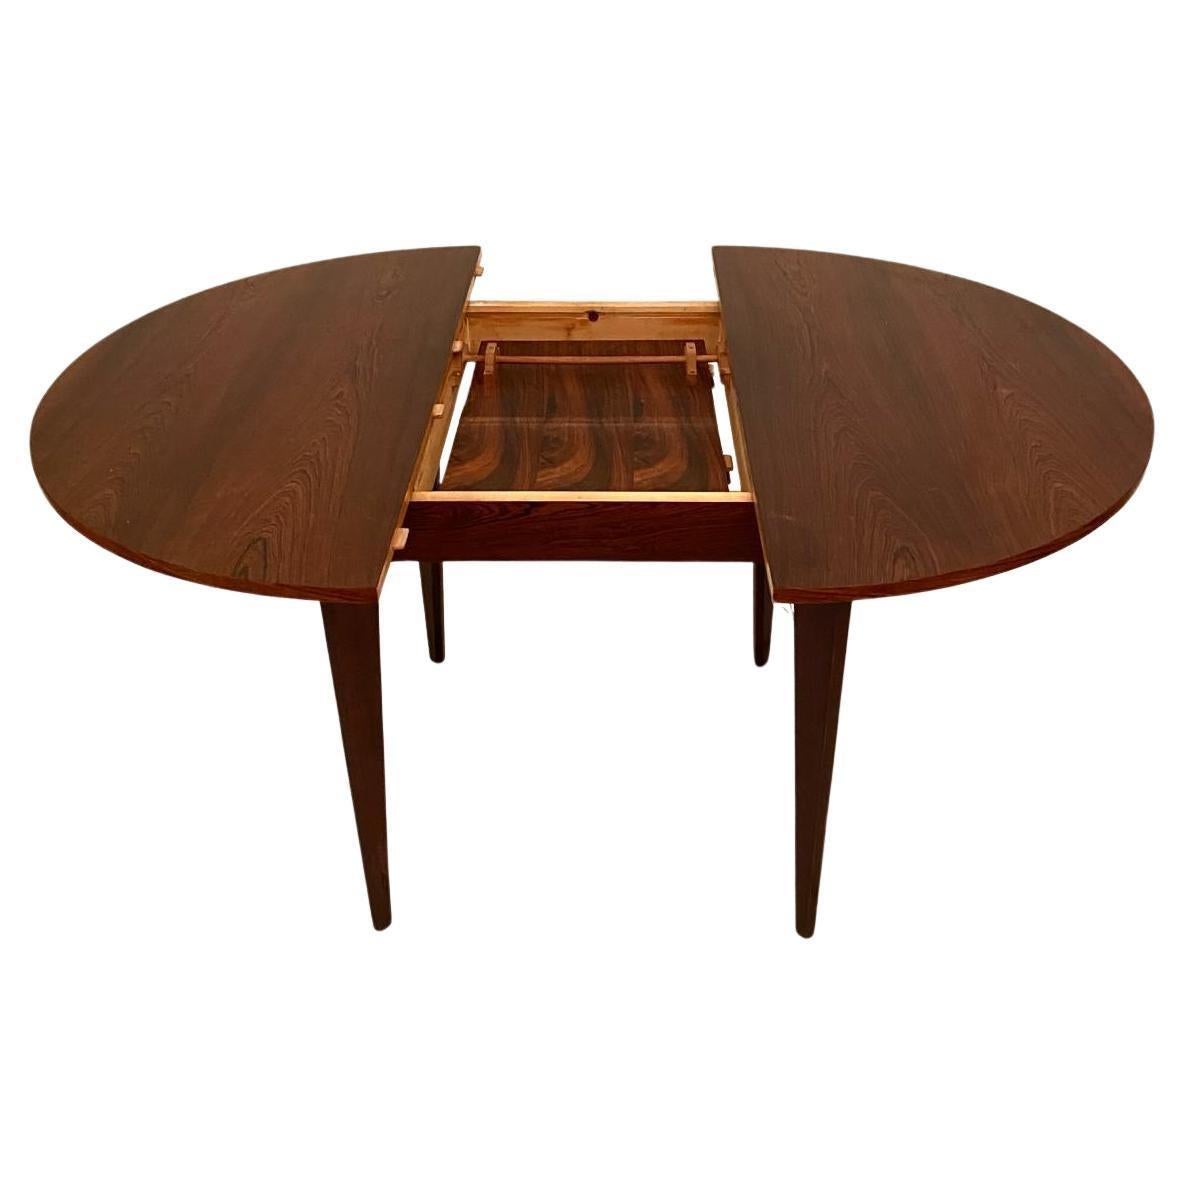 Mid Century Modern Italian Extendible Dining Table, Vittorio Dassi, 1960 's In Good Condition For Sale In Ceglie Messapica, IT